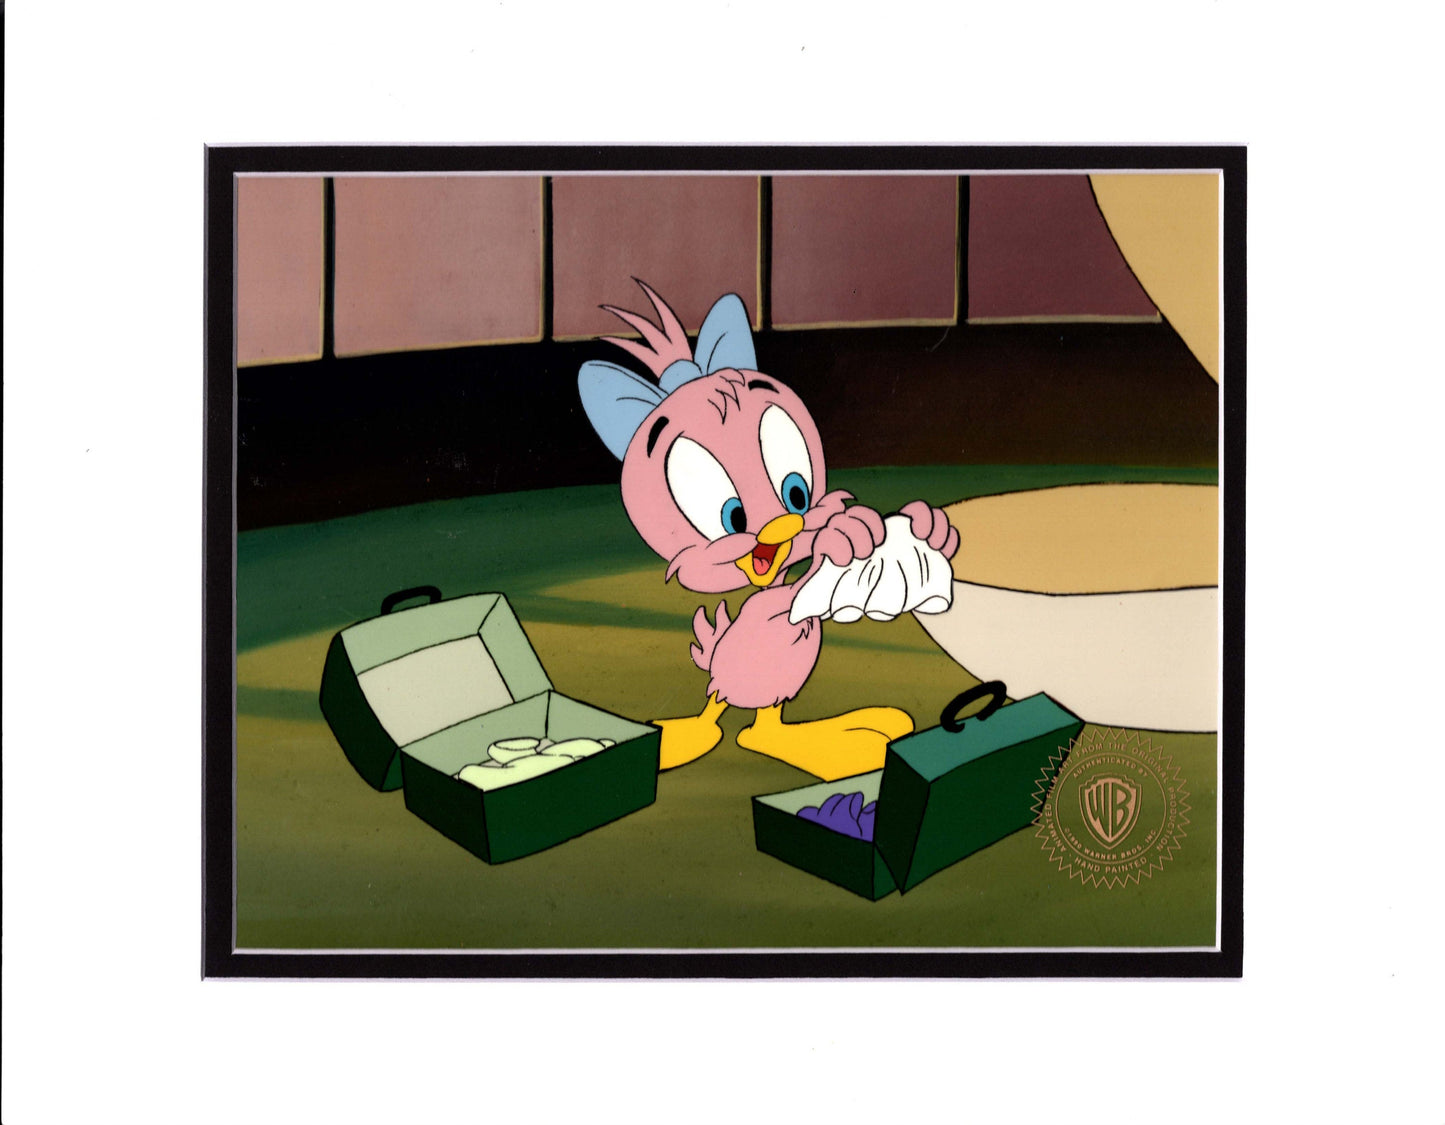 Tiny Toons Original Production Animation Cel Sweetie Bird 1990-92 Spielberg with WB Seal and COA 17